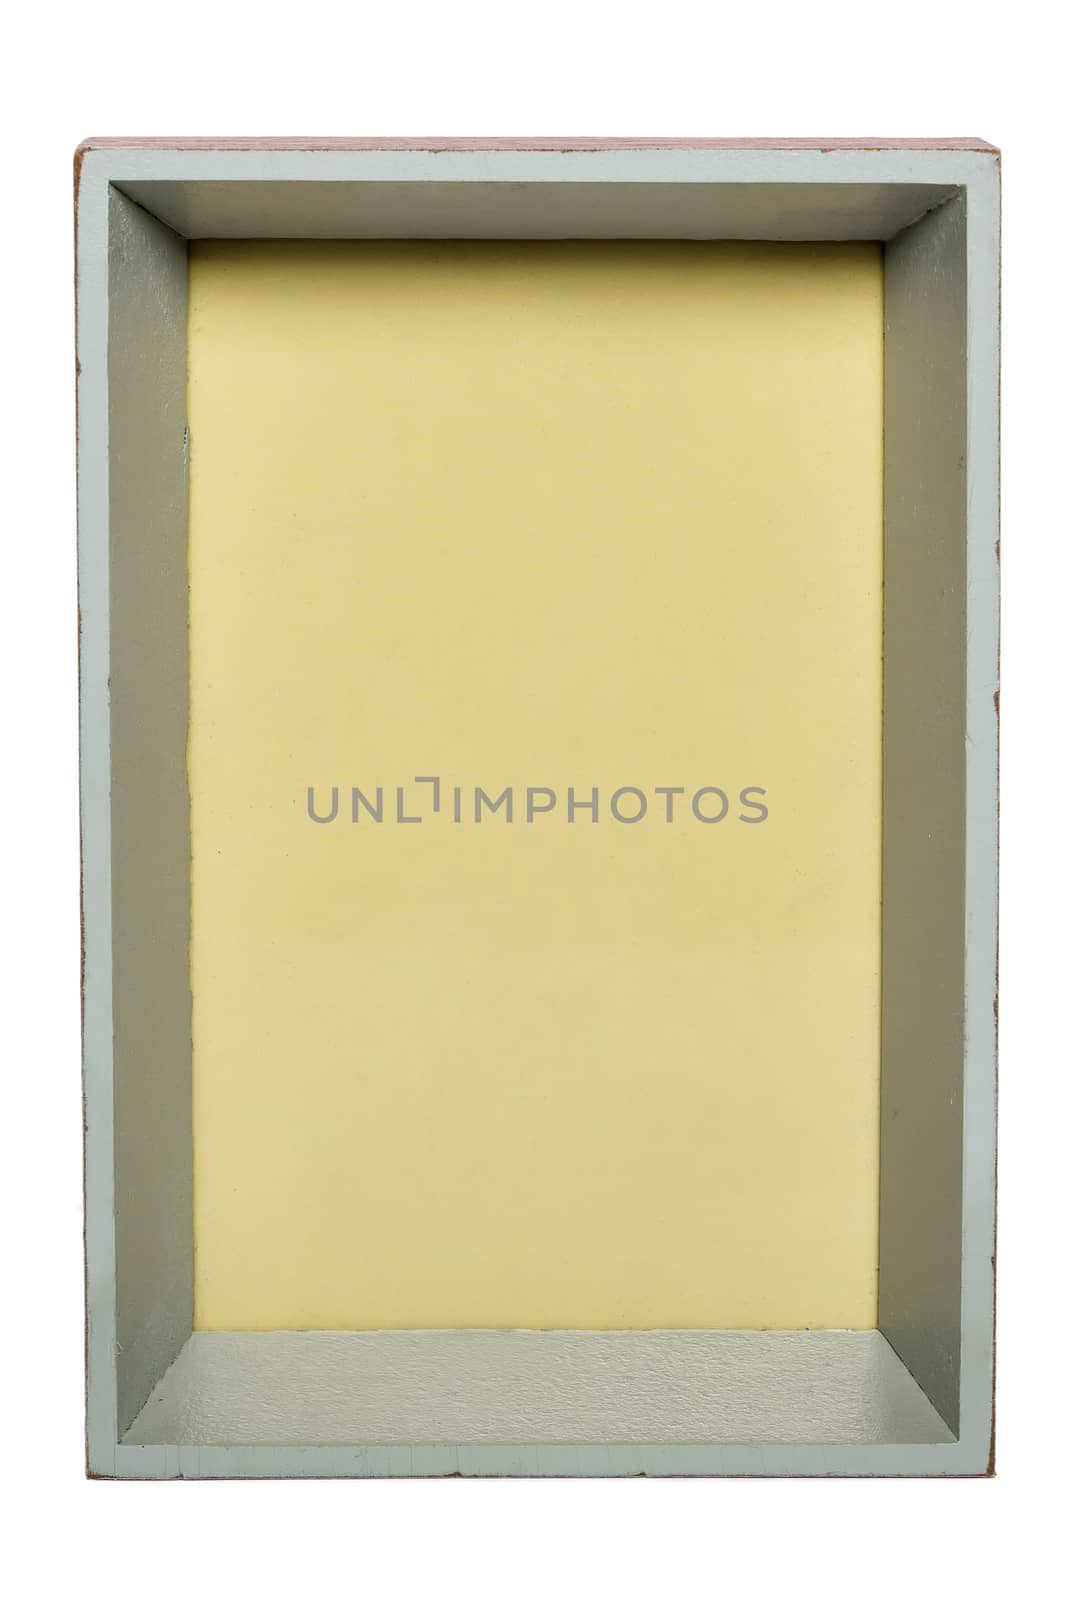 Photo frame with yellow background by mkos83